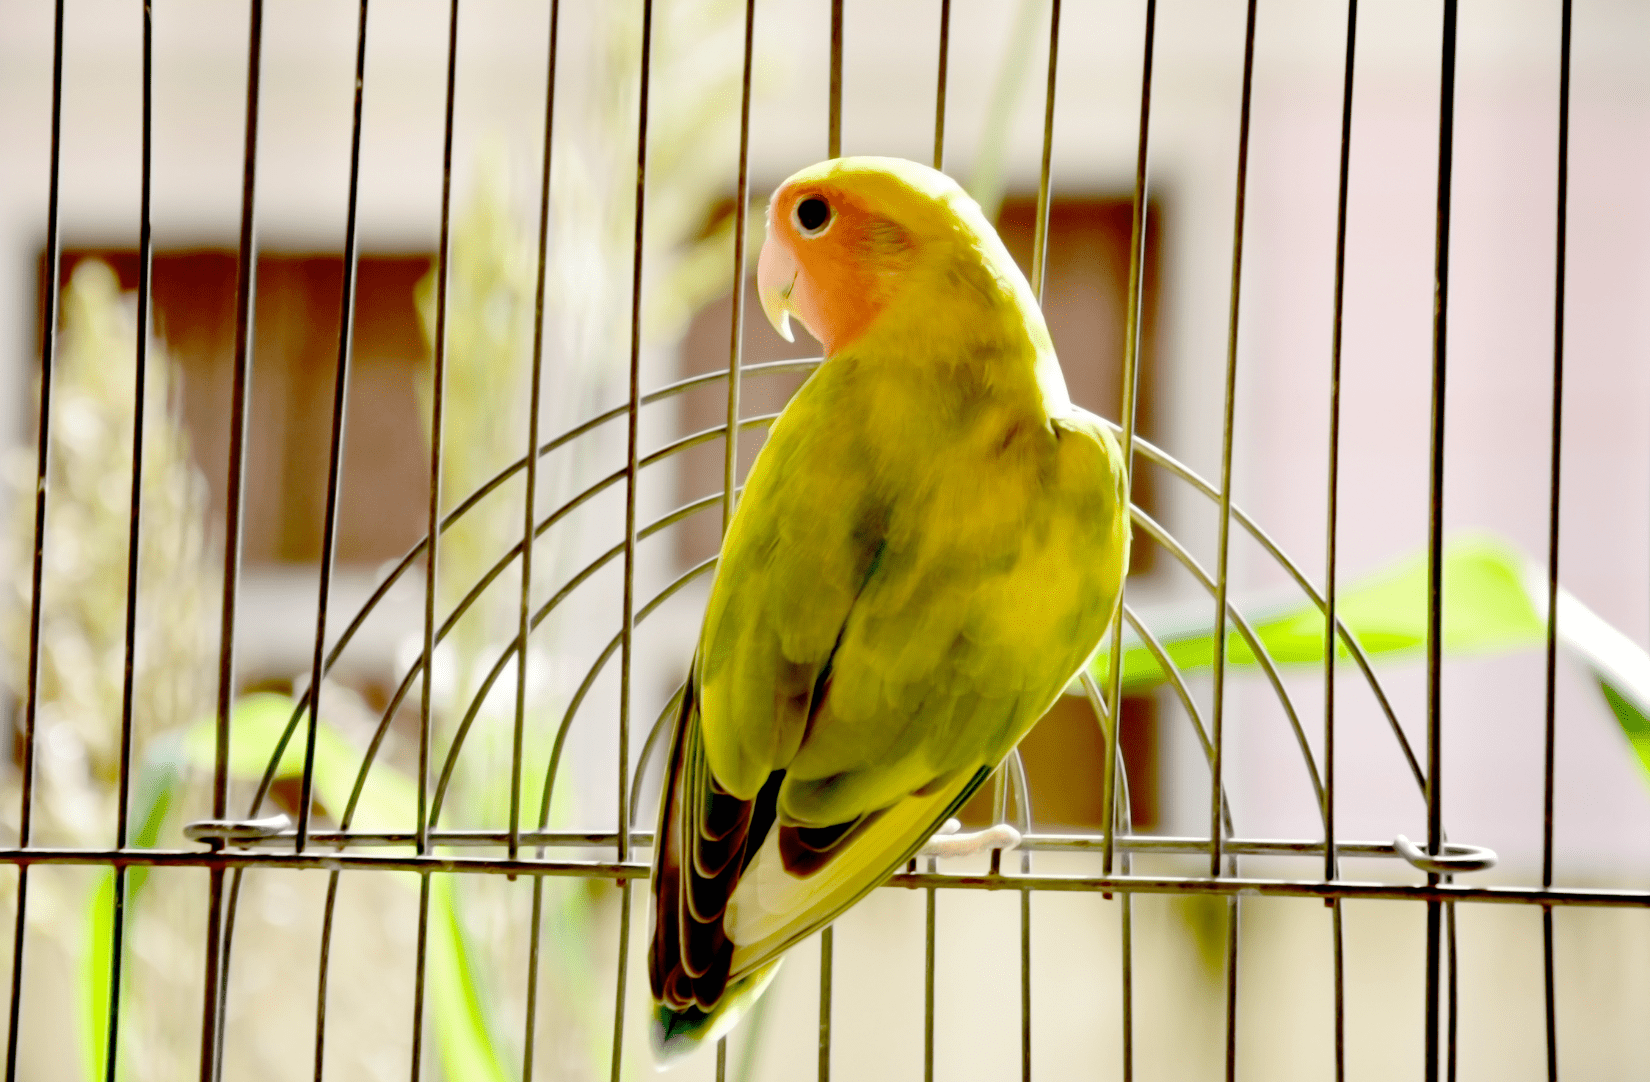 Exotic red and yellow pet bird on a perch in a cage